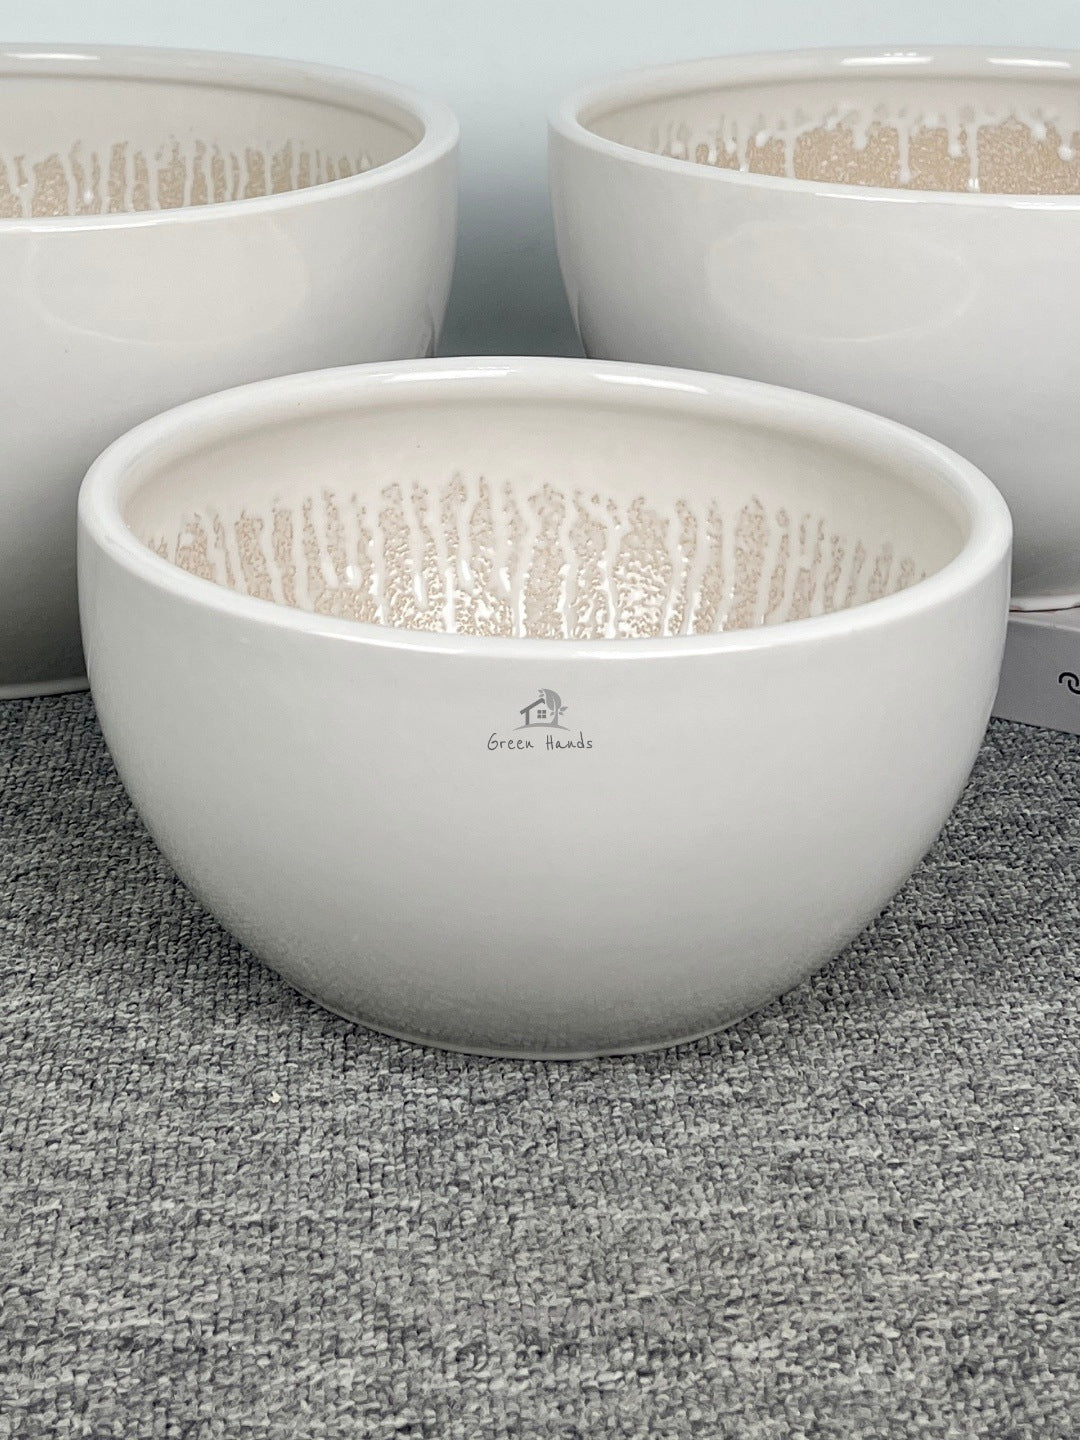 Bonsai-Style Flat Glossy White Ceramic Pots: Contemporary Decor for Offices & Homes in Dubai & Abu Dhabi | Perfect for Plants | Drain Holes and Base Plates